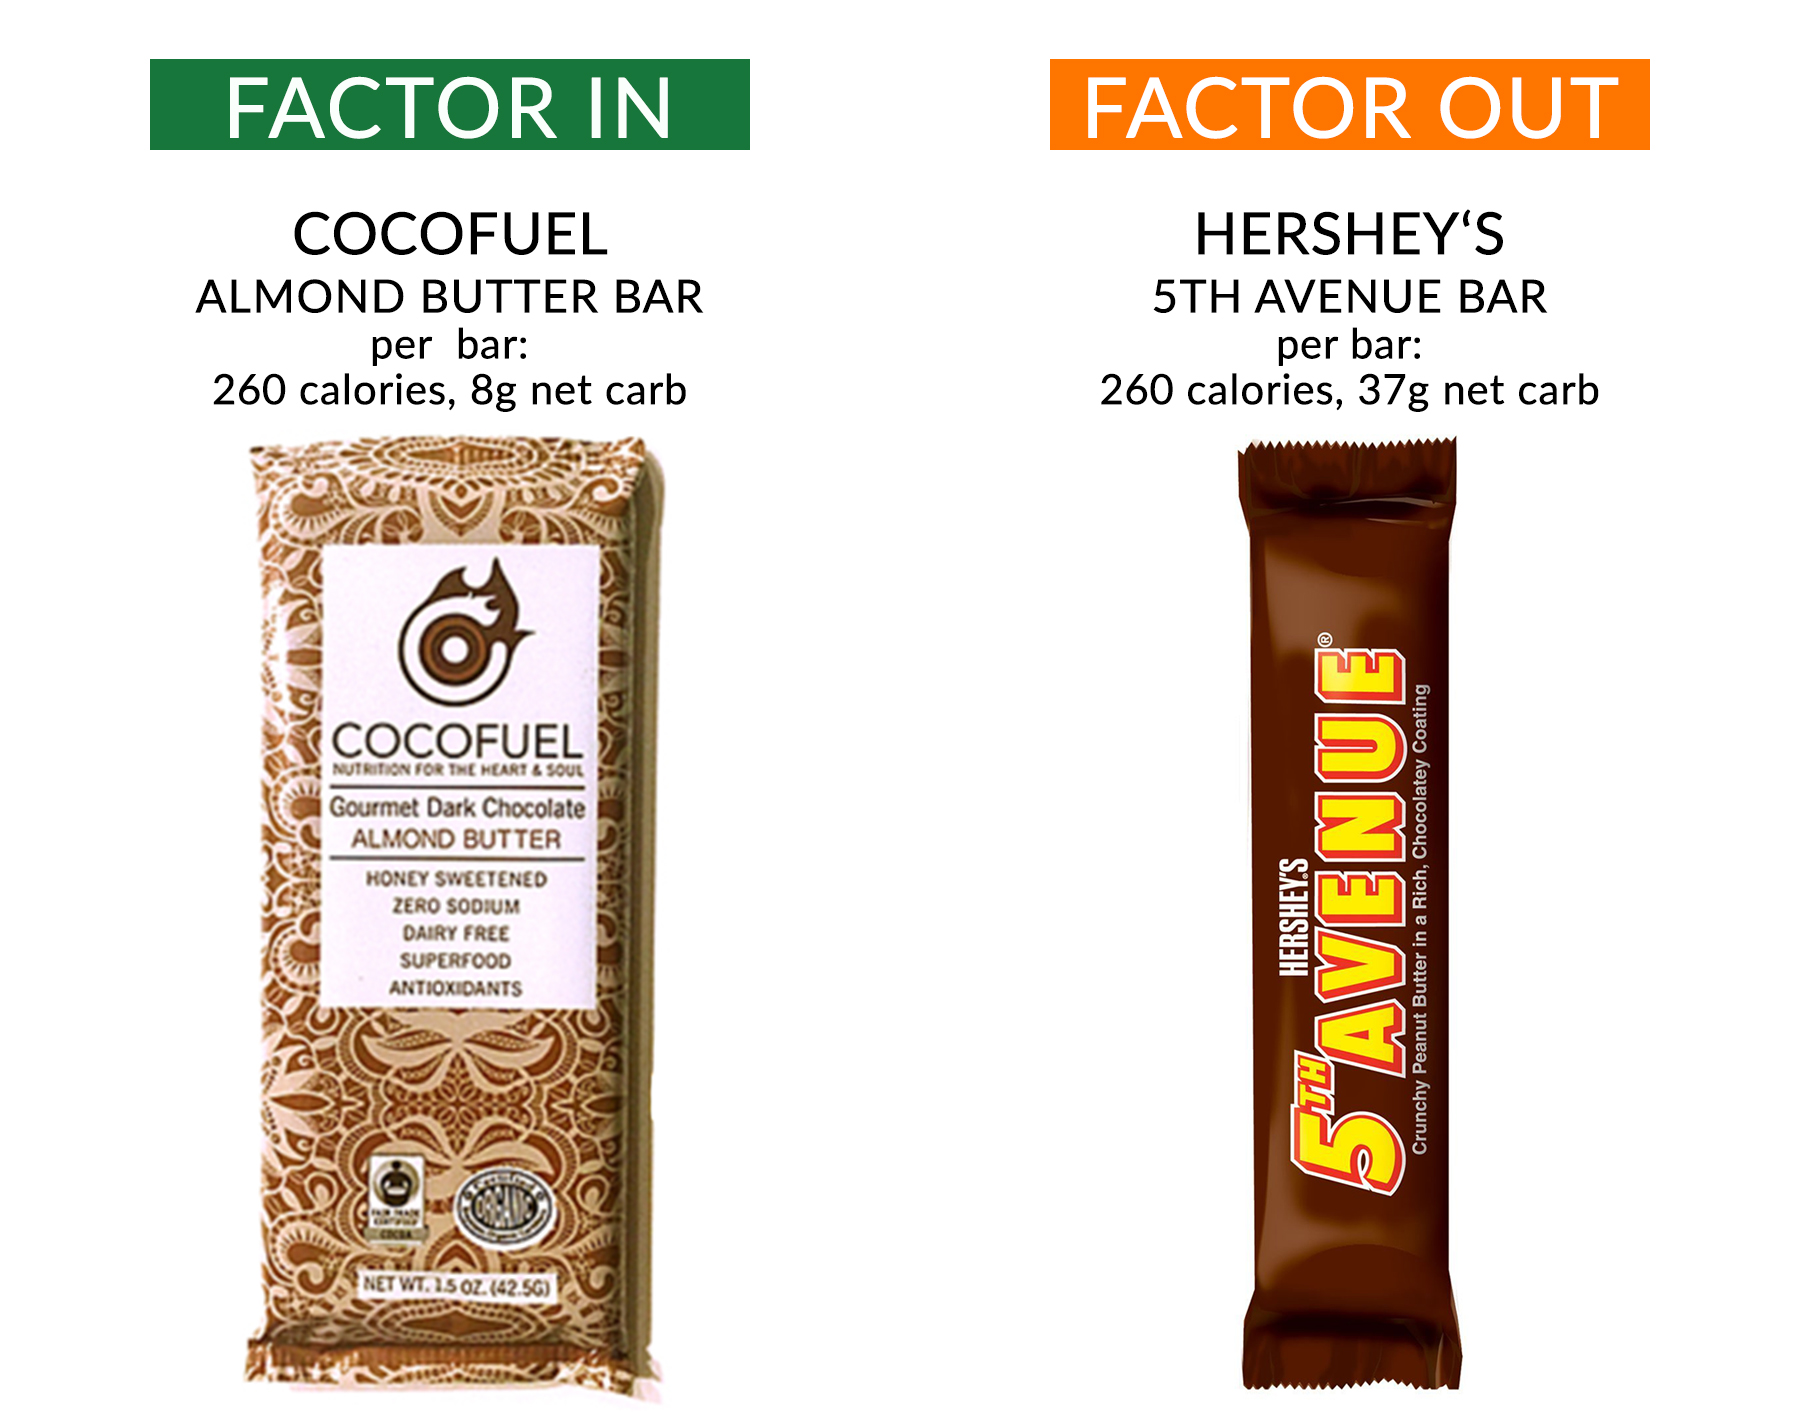 Cocofuel vs. chocolate bar by F-Factor